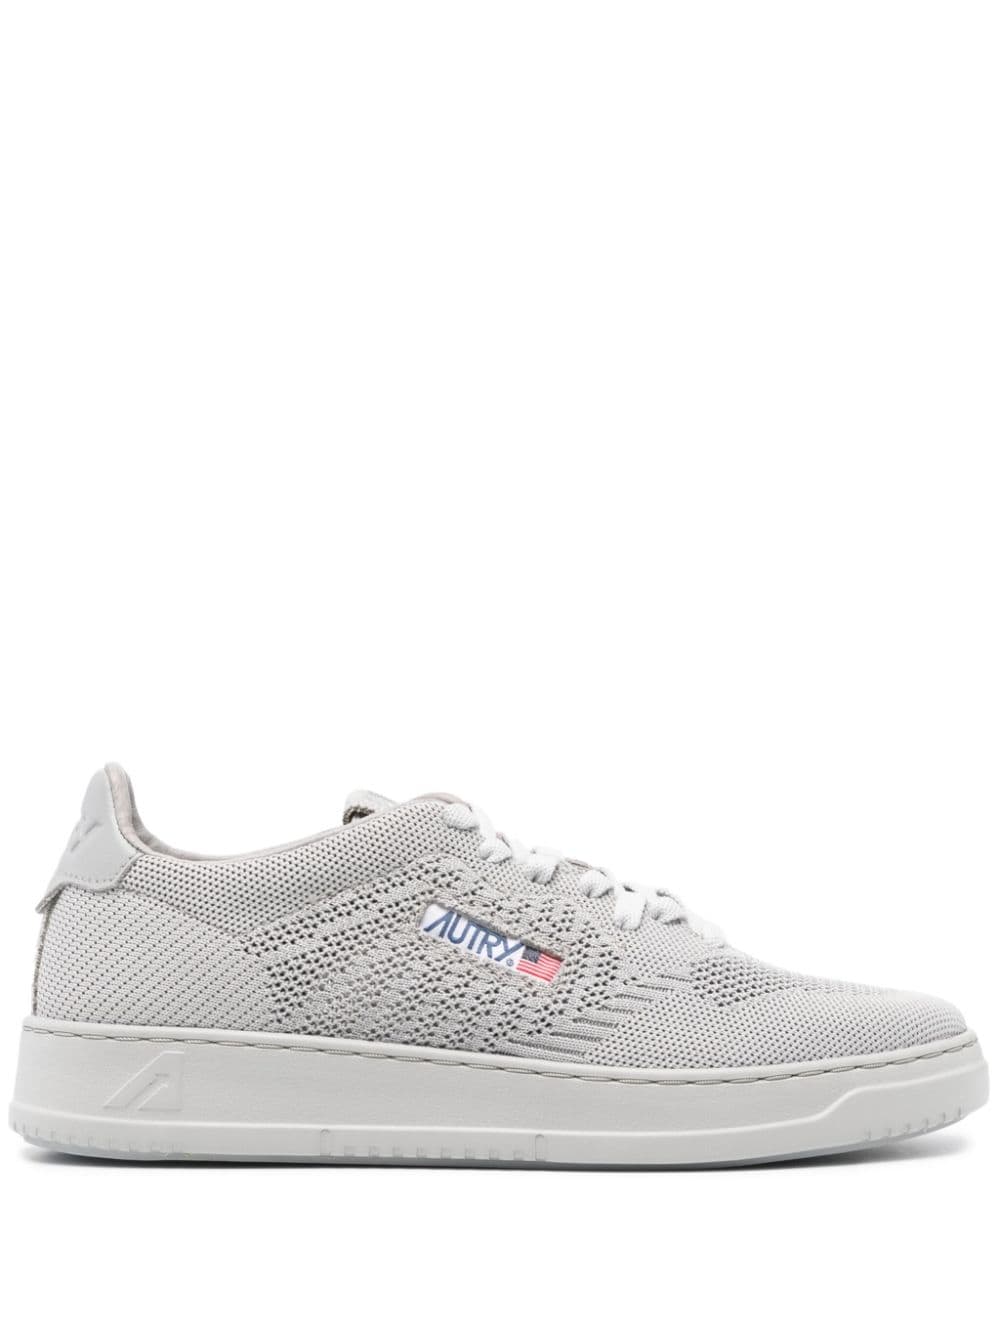 Autry Easeknit Lace-up Sneakers In Grey